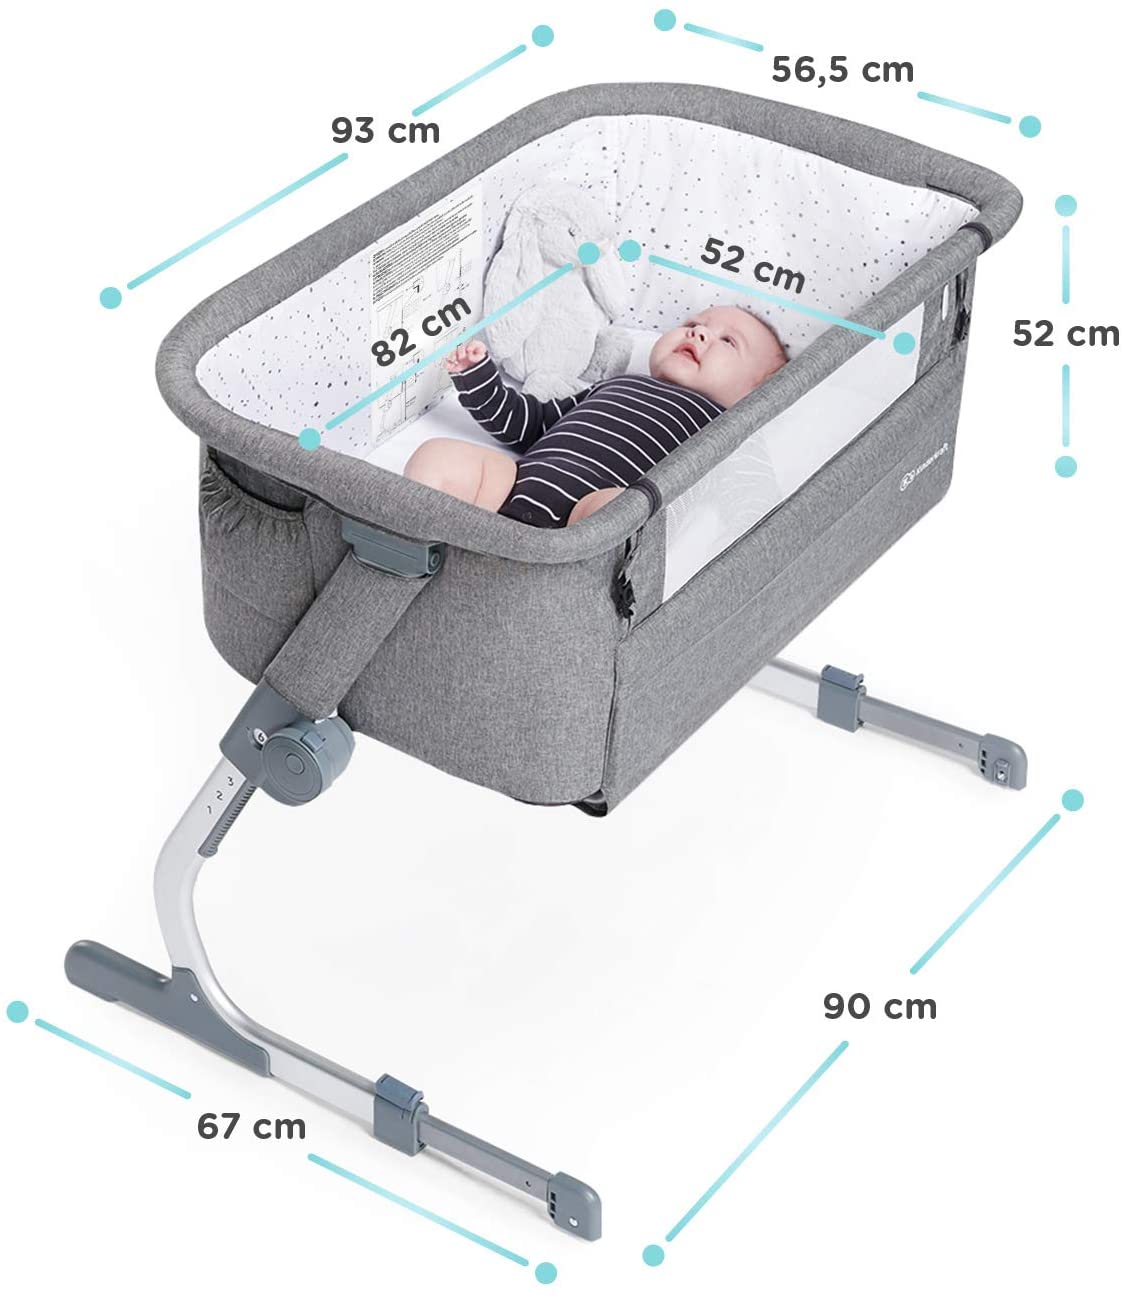 Bedside Crib UNO UP, Travel Cot, Co-Sleeping Bed, Ajustable Height, Easy Fixing, Foldable Side Wall, Transport Wheels, with Accessories, Mattress, Cotton Sheet, for Newborn